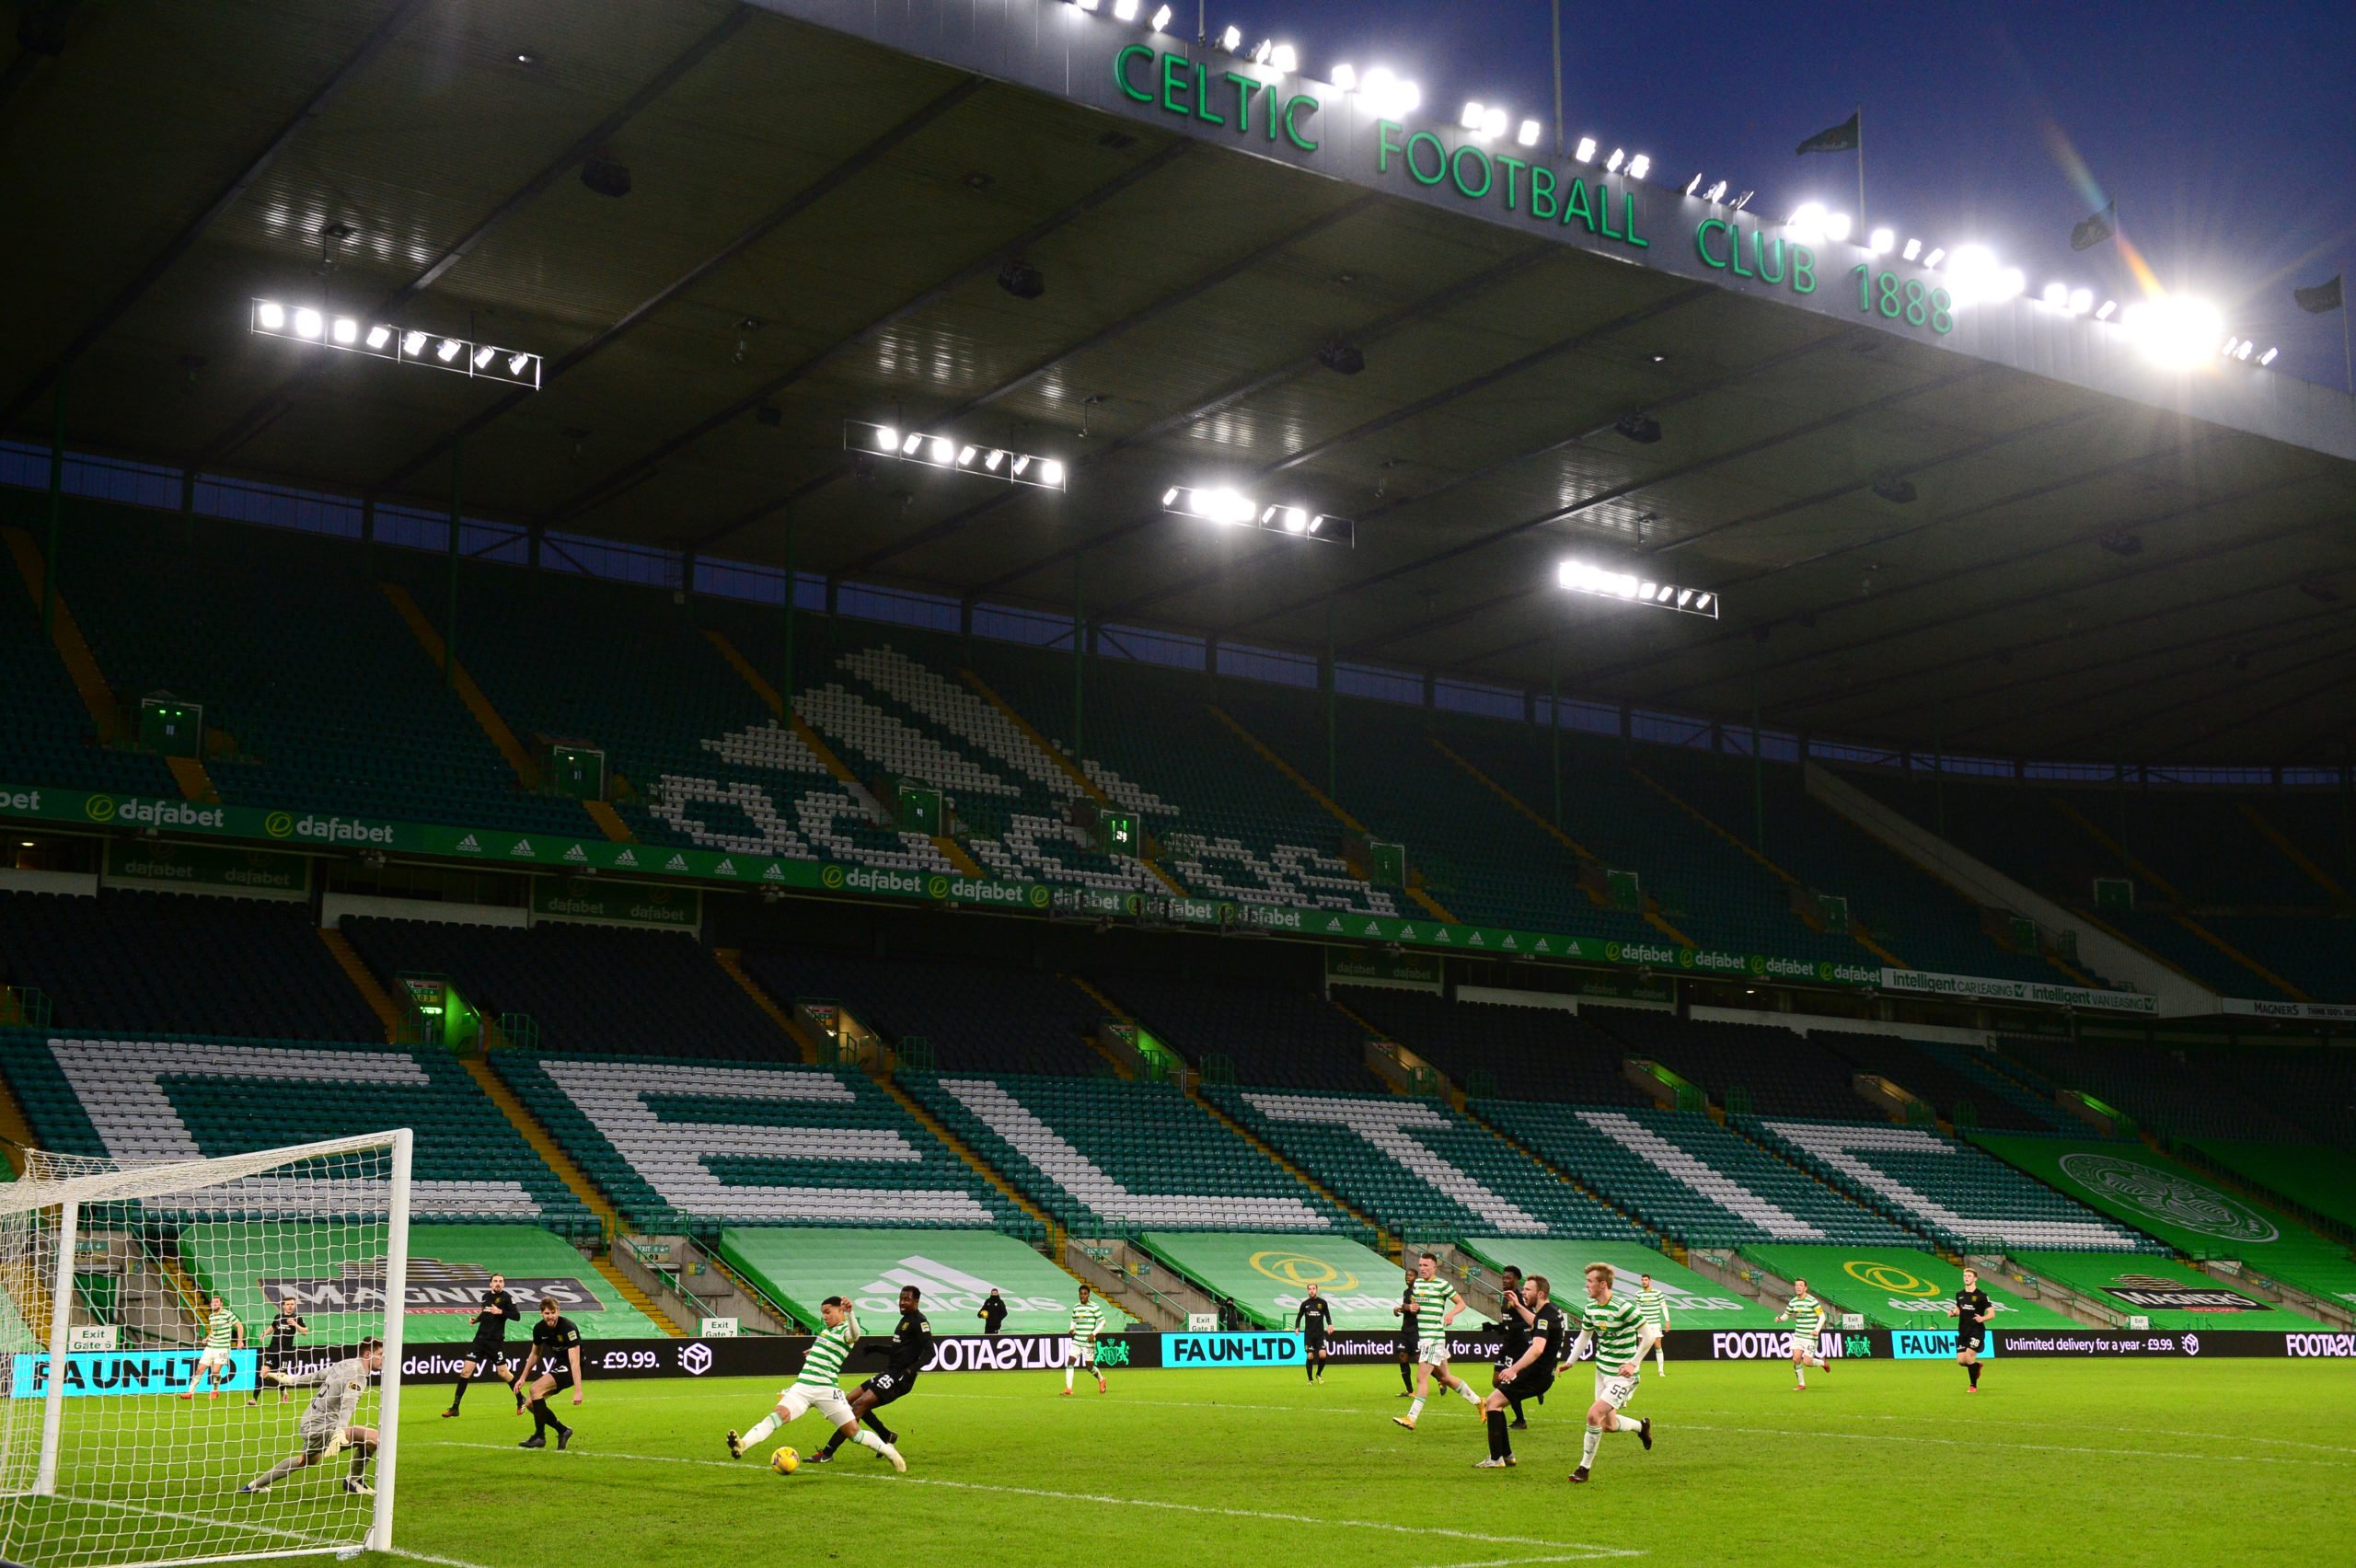 Celtic look to secure global gaze with commercial deal; advantages explored